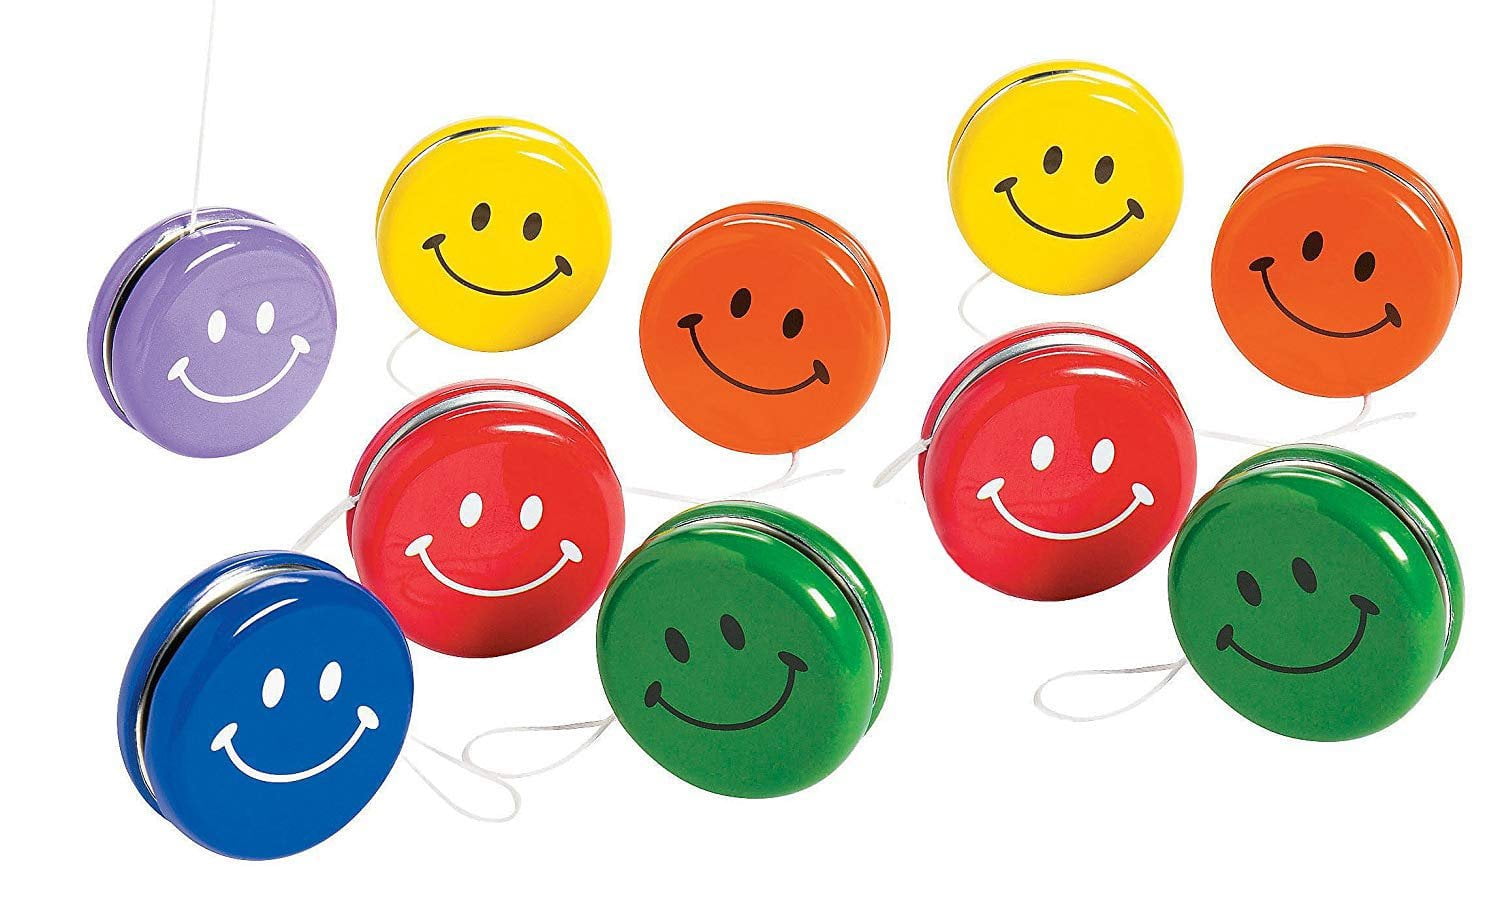 Smileys or Hearts Pack of 4 Pencils with Rubber Toppers Great Part Bag Filler